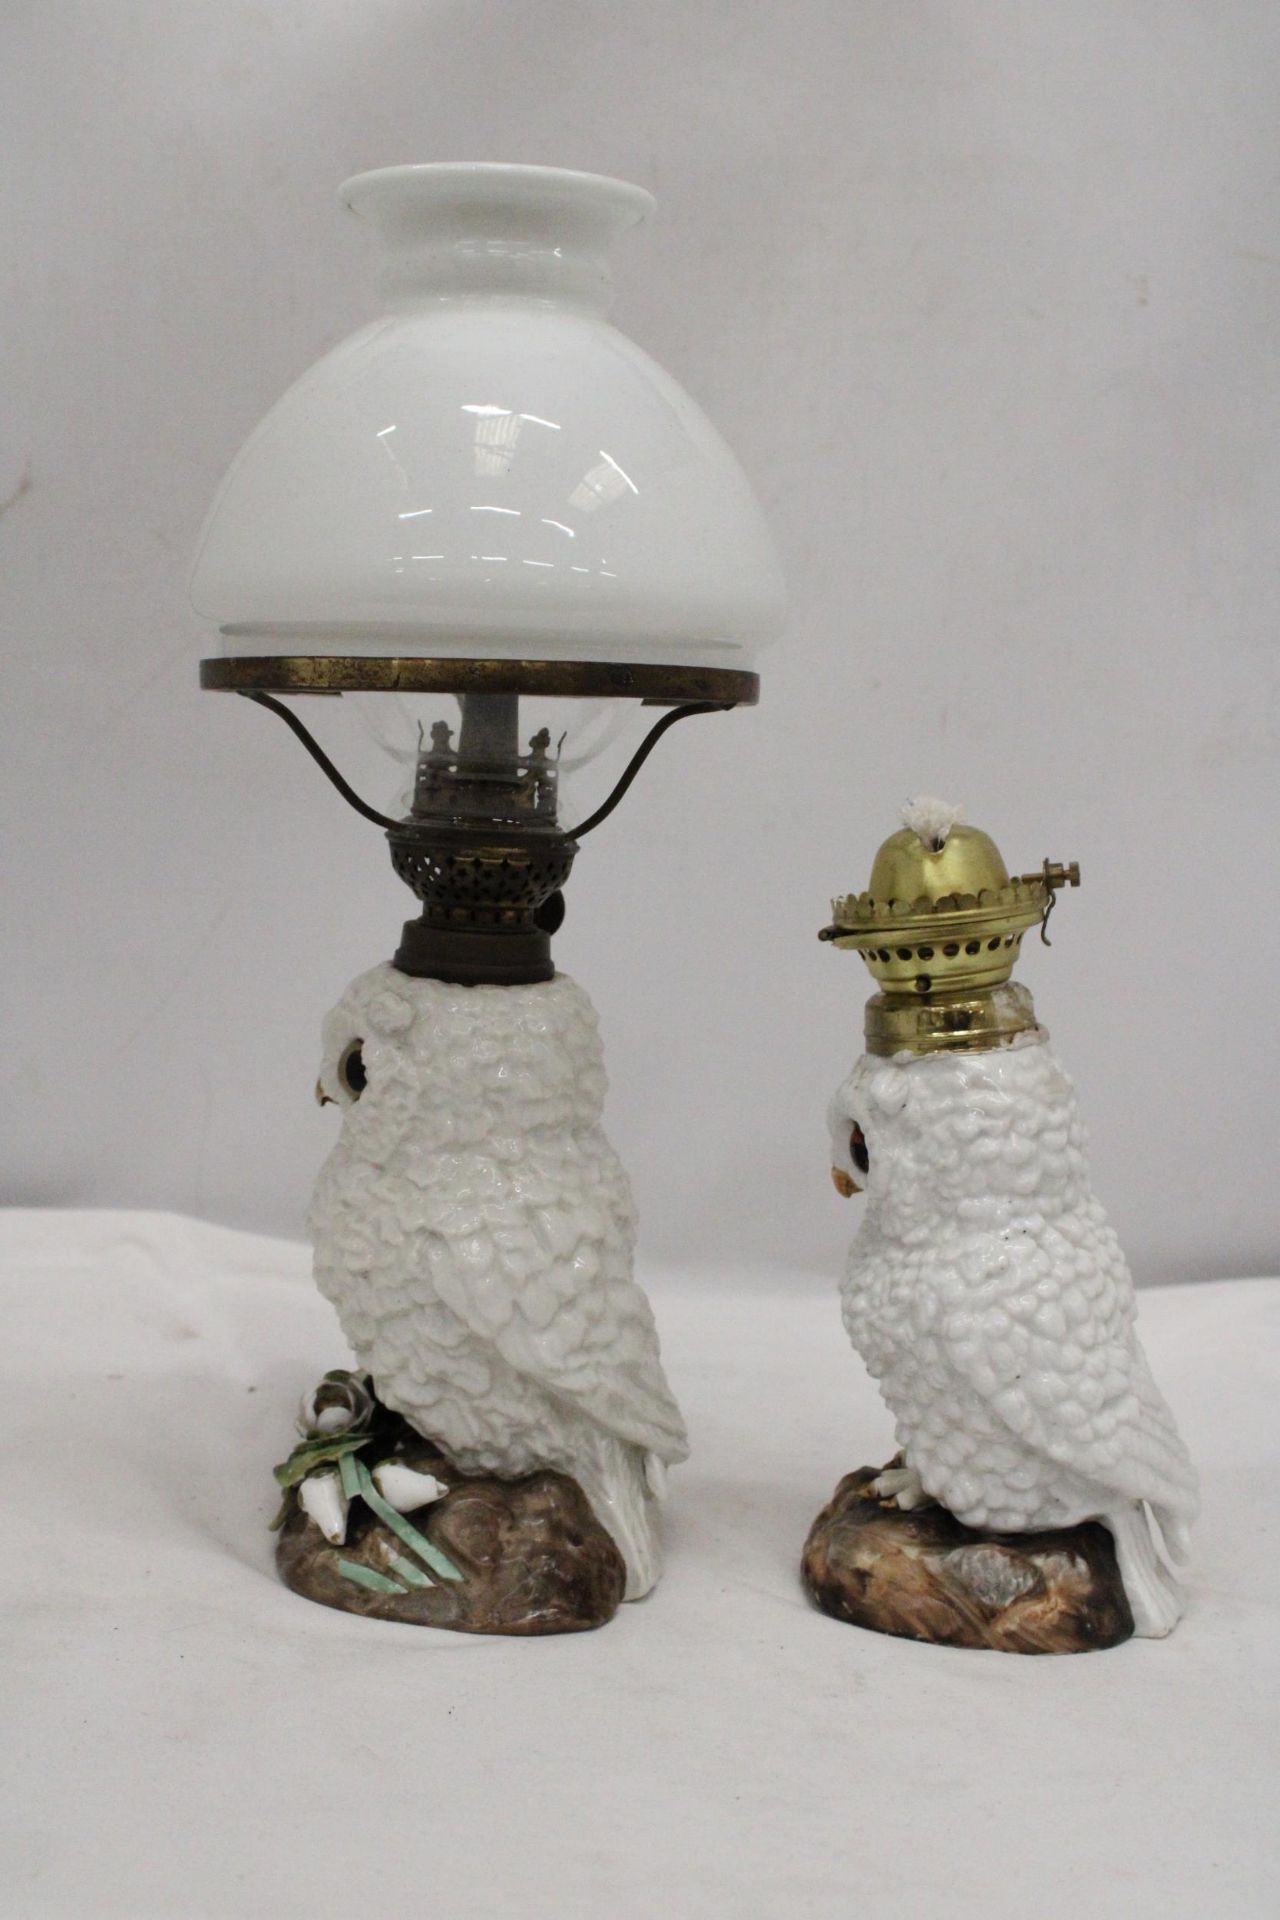 TWO VINTAGE OIL LAMPS WITH OWL BASES, ONE MISSING THE SHADE, HEIGHT 35CM - Image 7 of 7